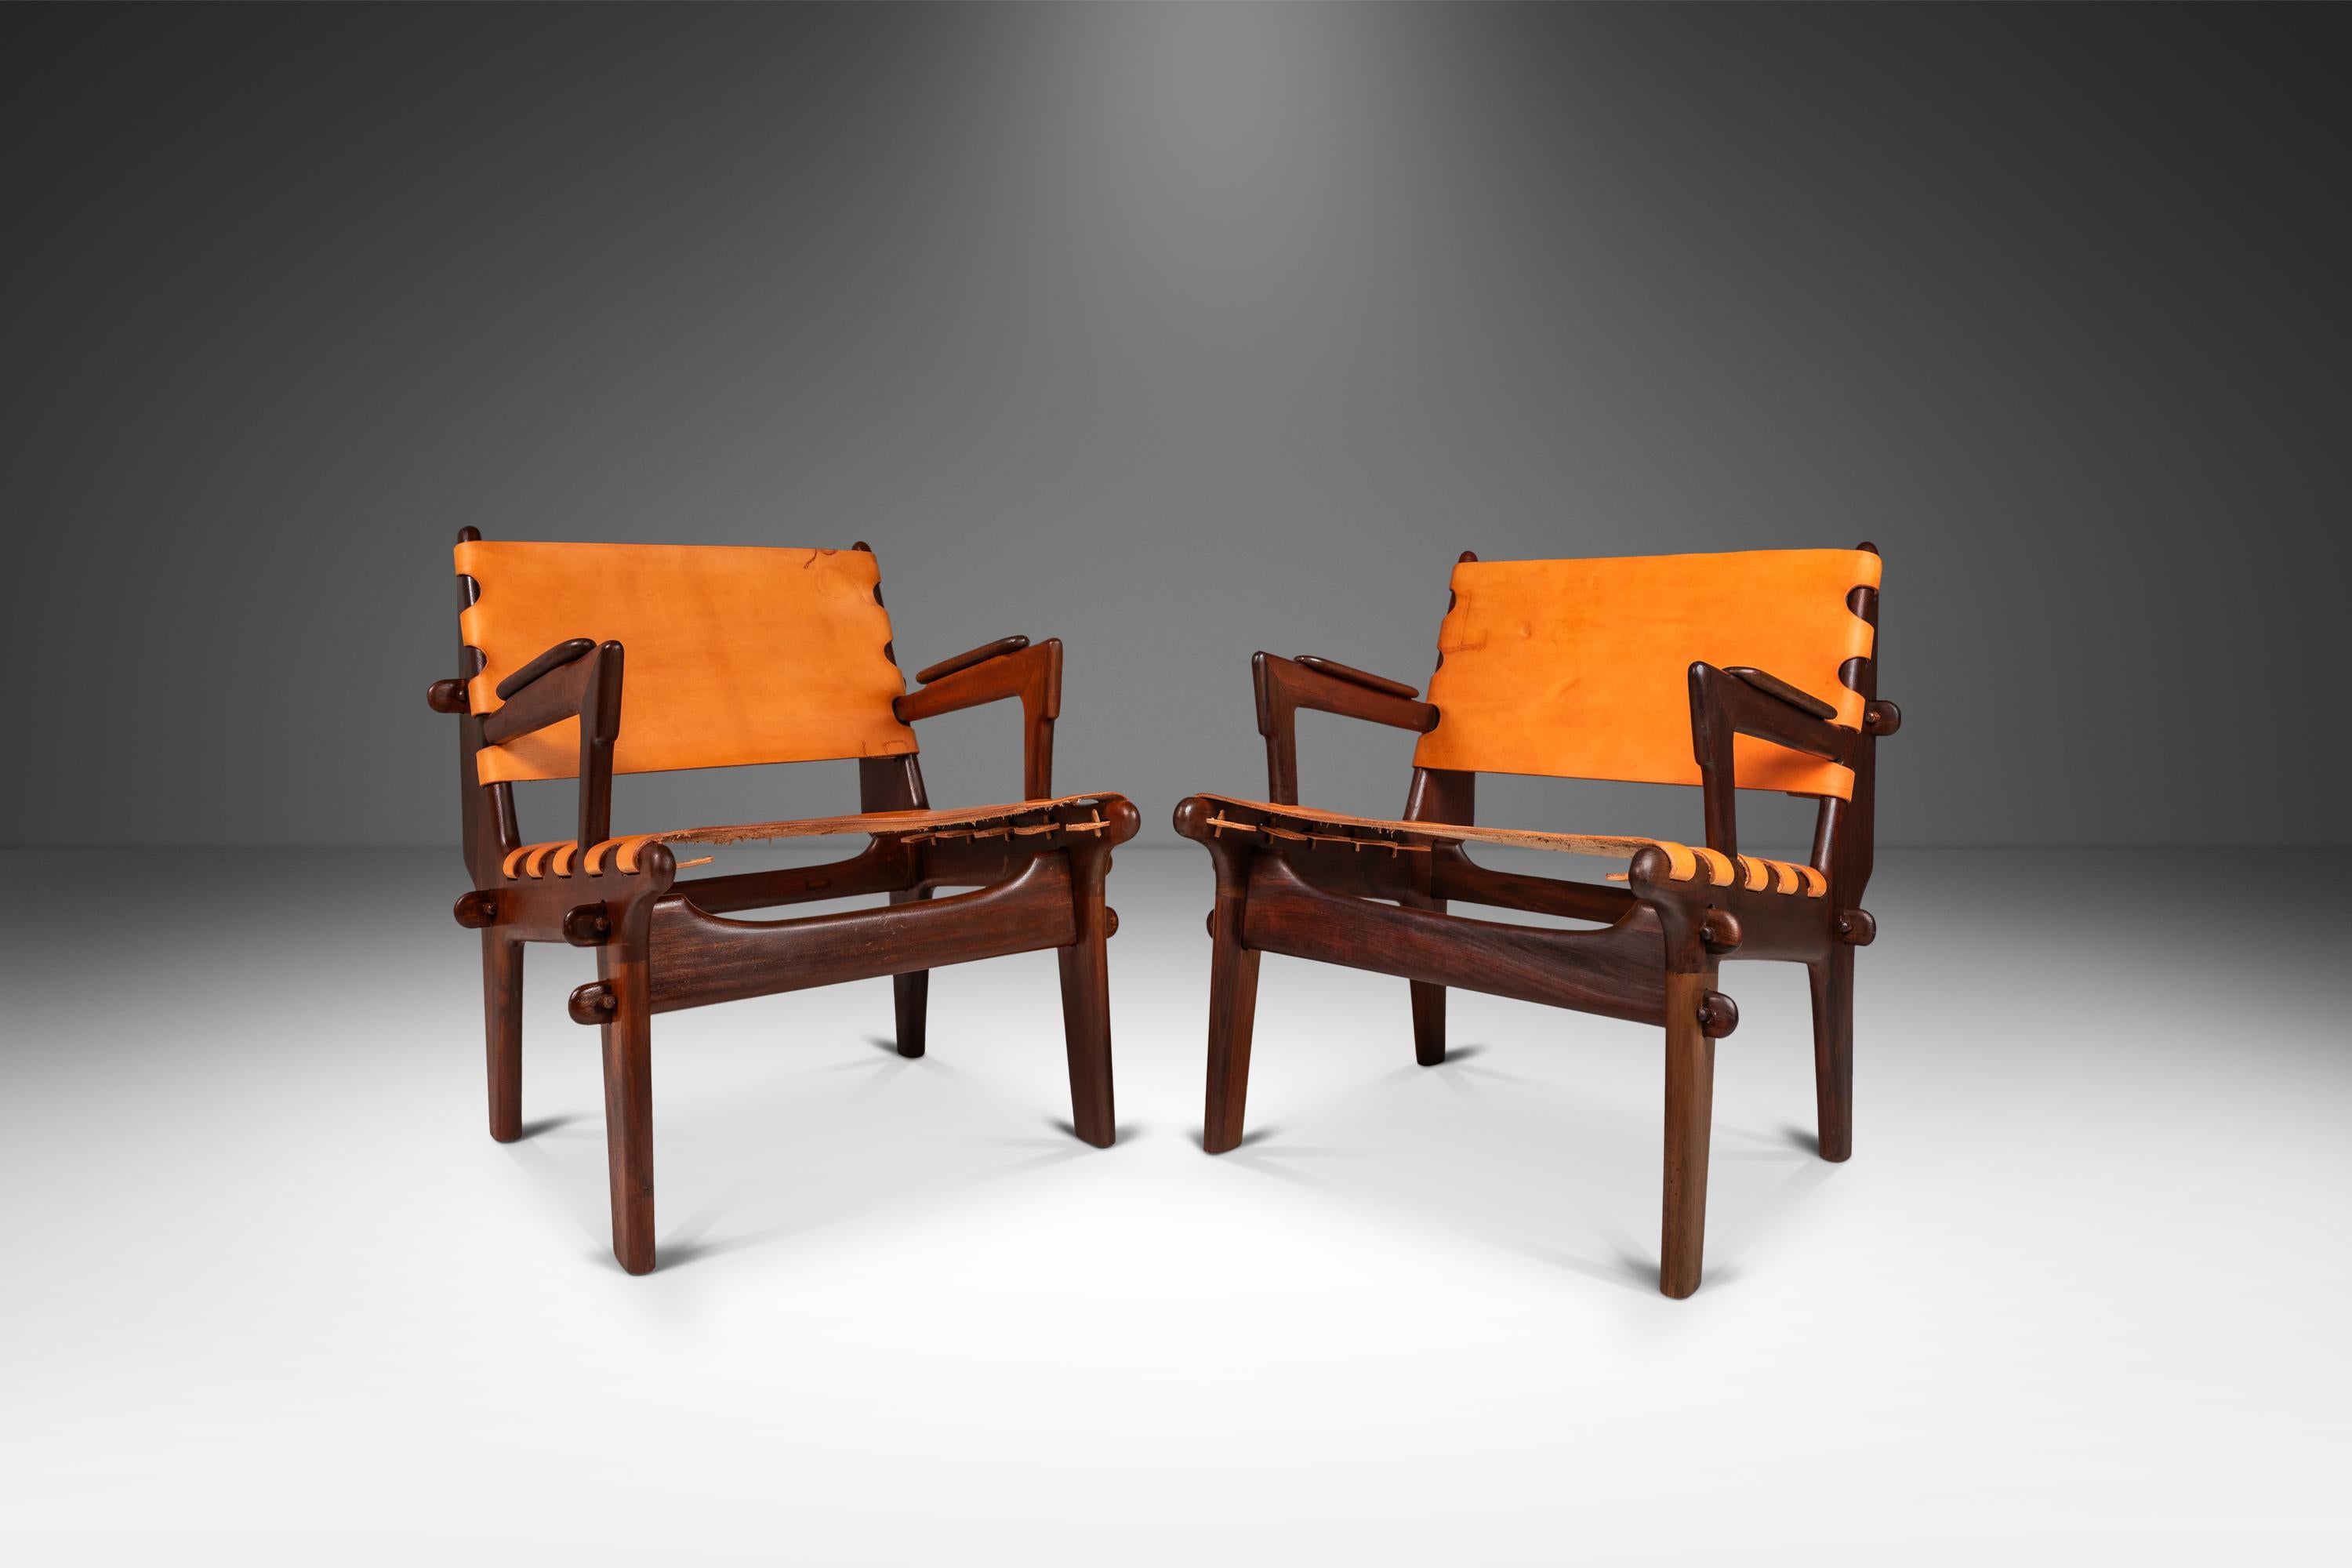 Spanish Colonial Set of 2 Tooled Leather Sling Lounge Chairs by Angel Pazmi, Ecuador, c. 1960's For Sale